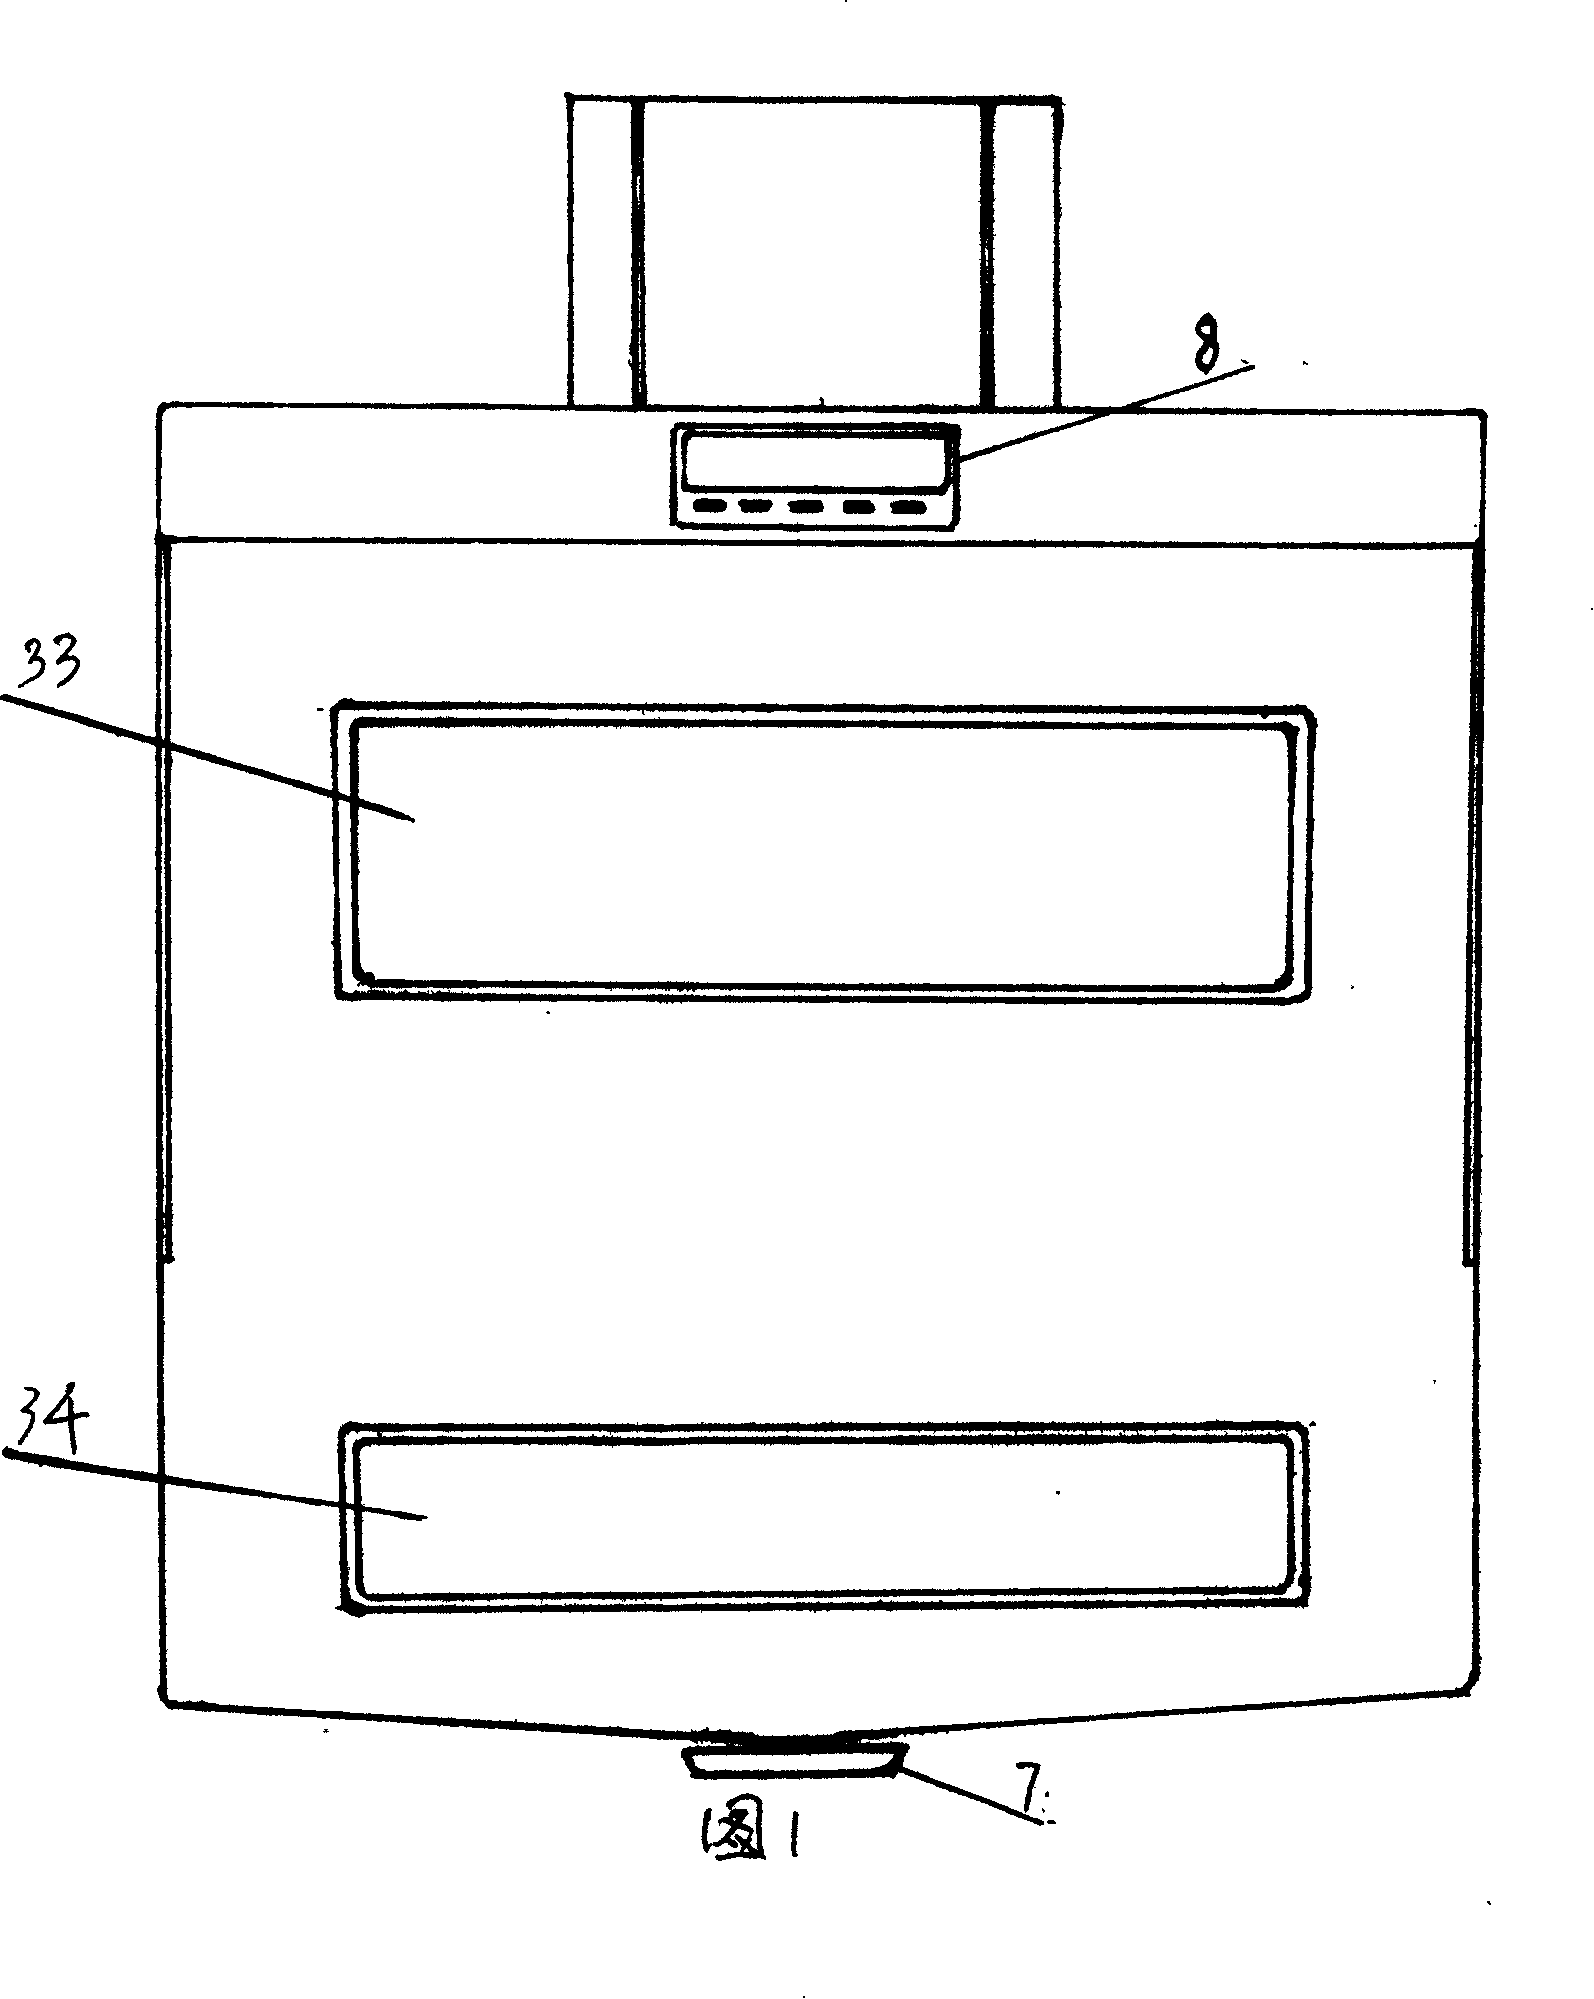 Plate-type fume exhauster